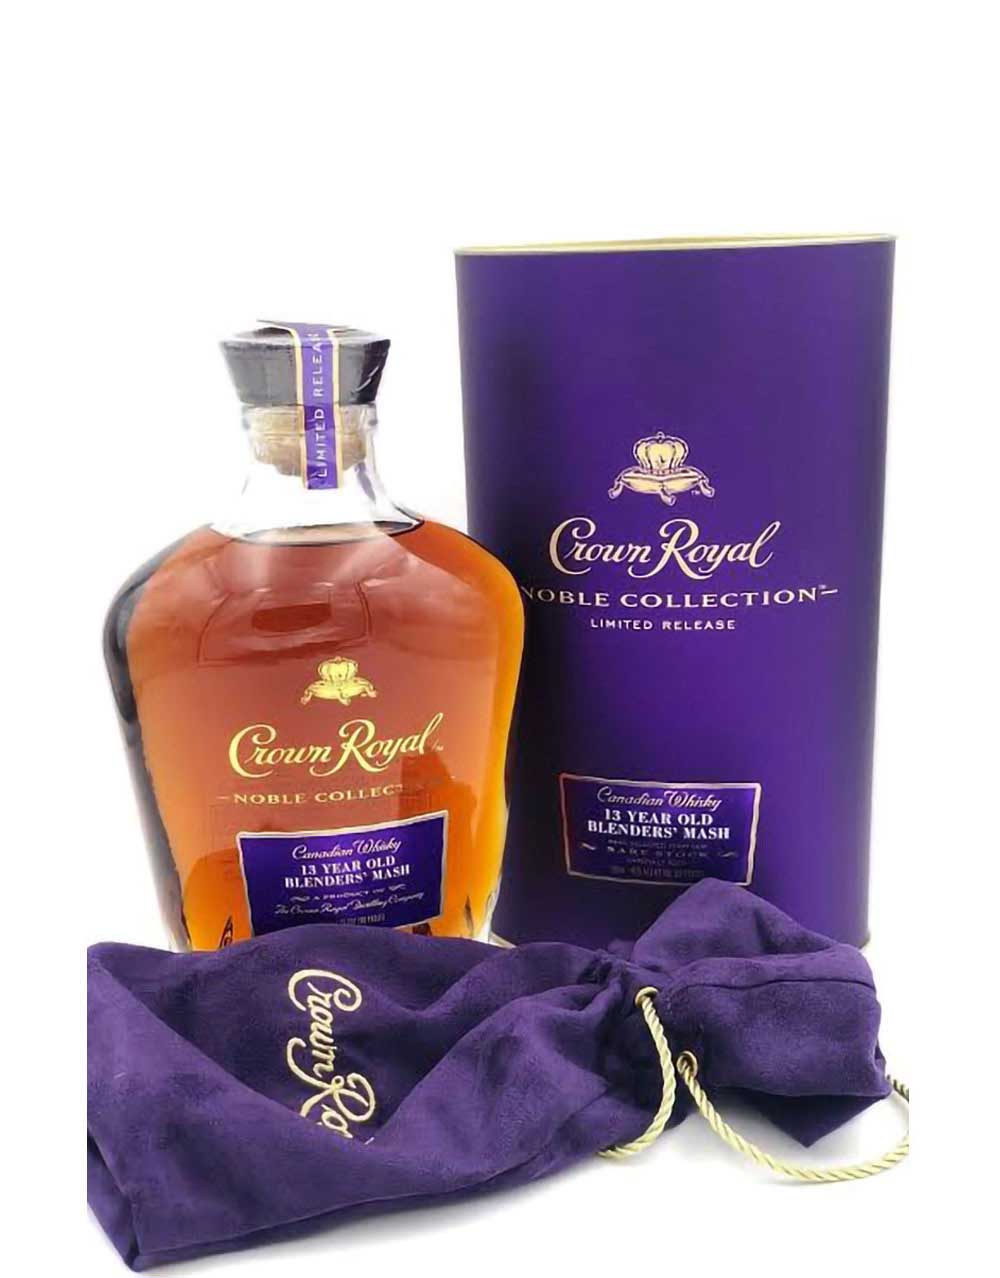 Crown Royal Noble Collection 13 Year Blenders' Mash Whisky